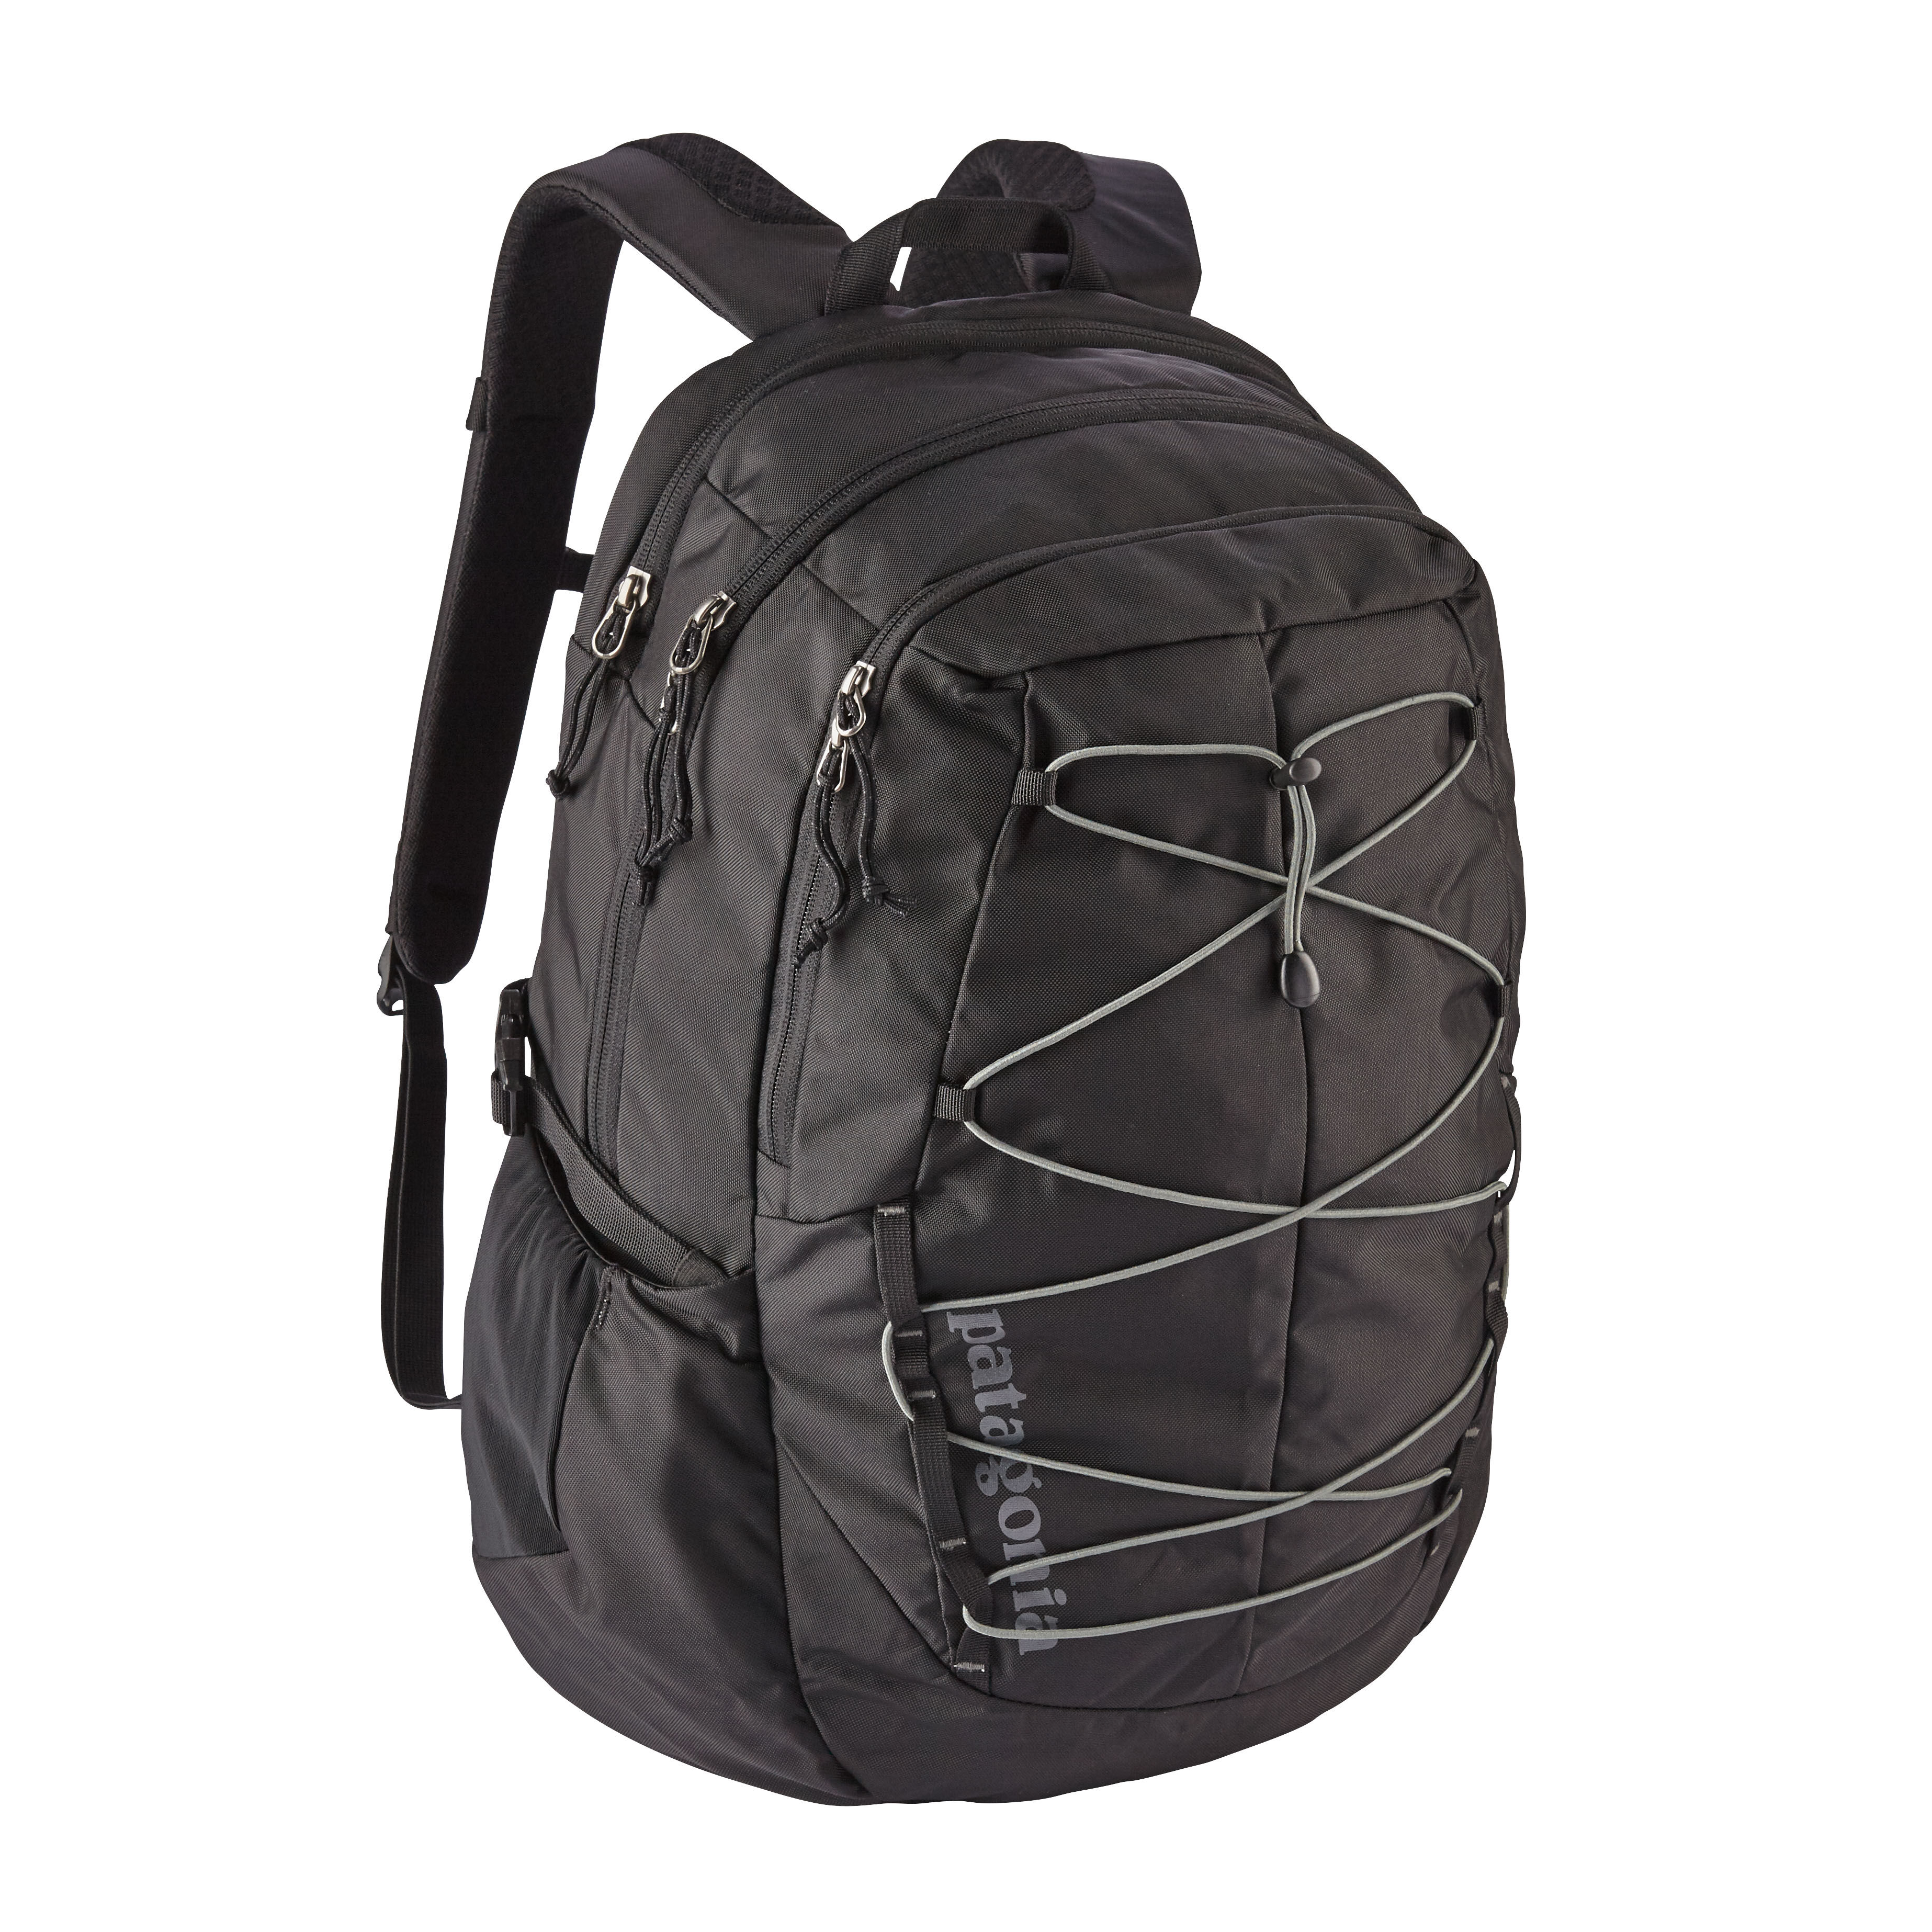 Patagonia Chacabuco Pack 30L - Rygsæk